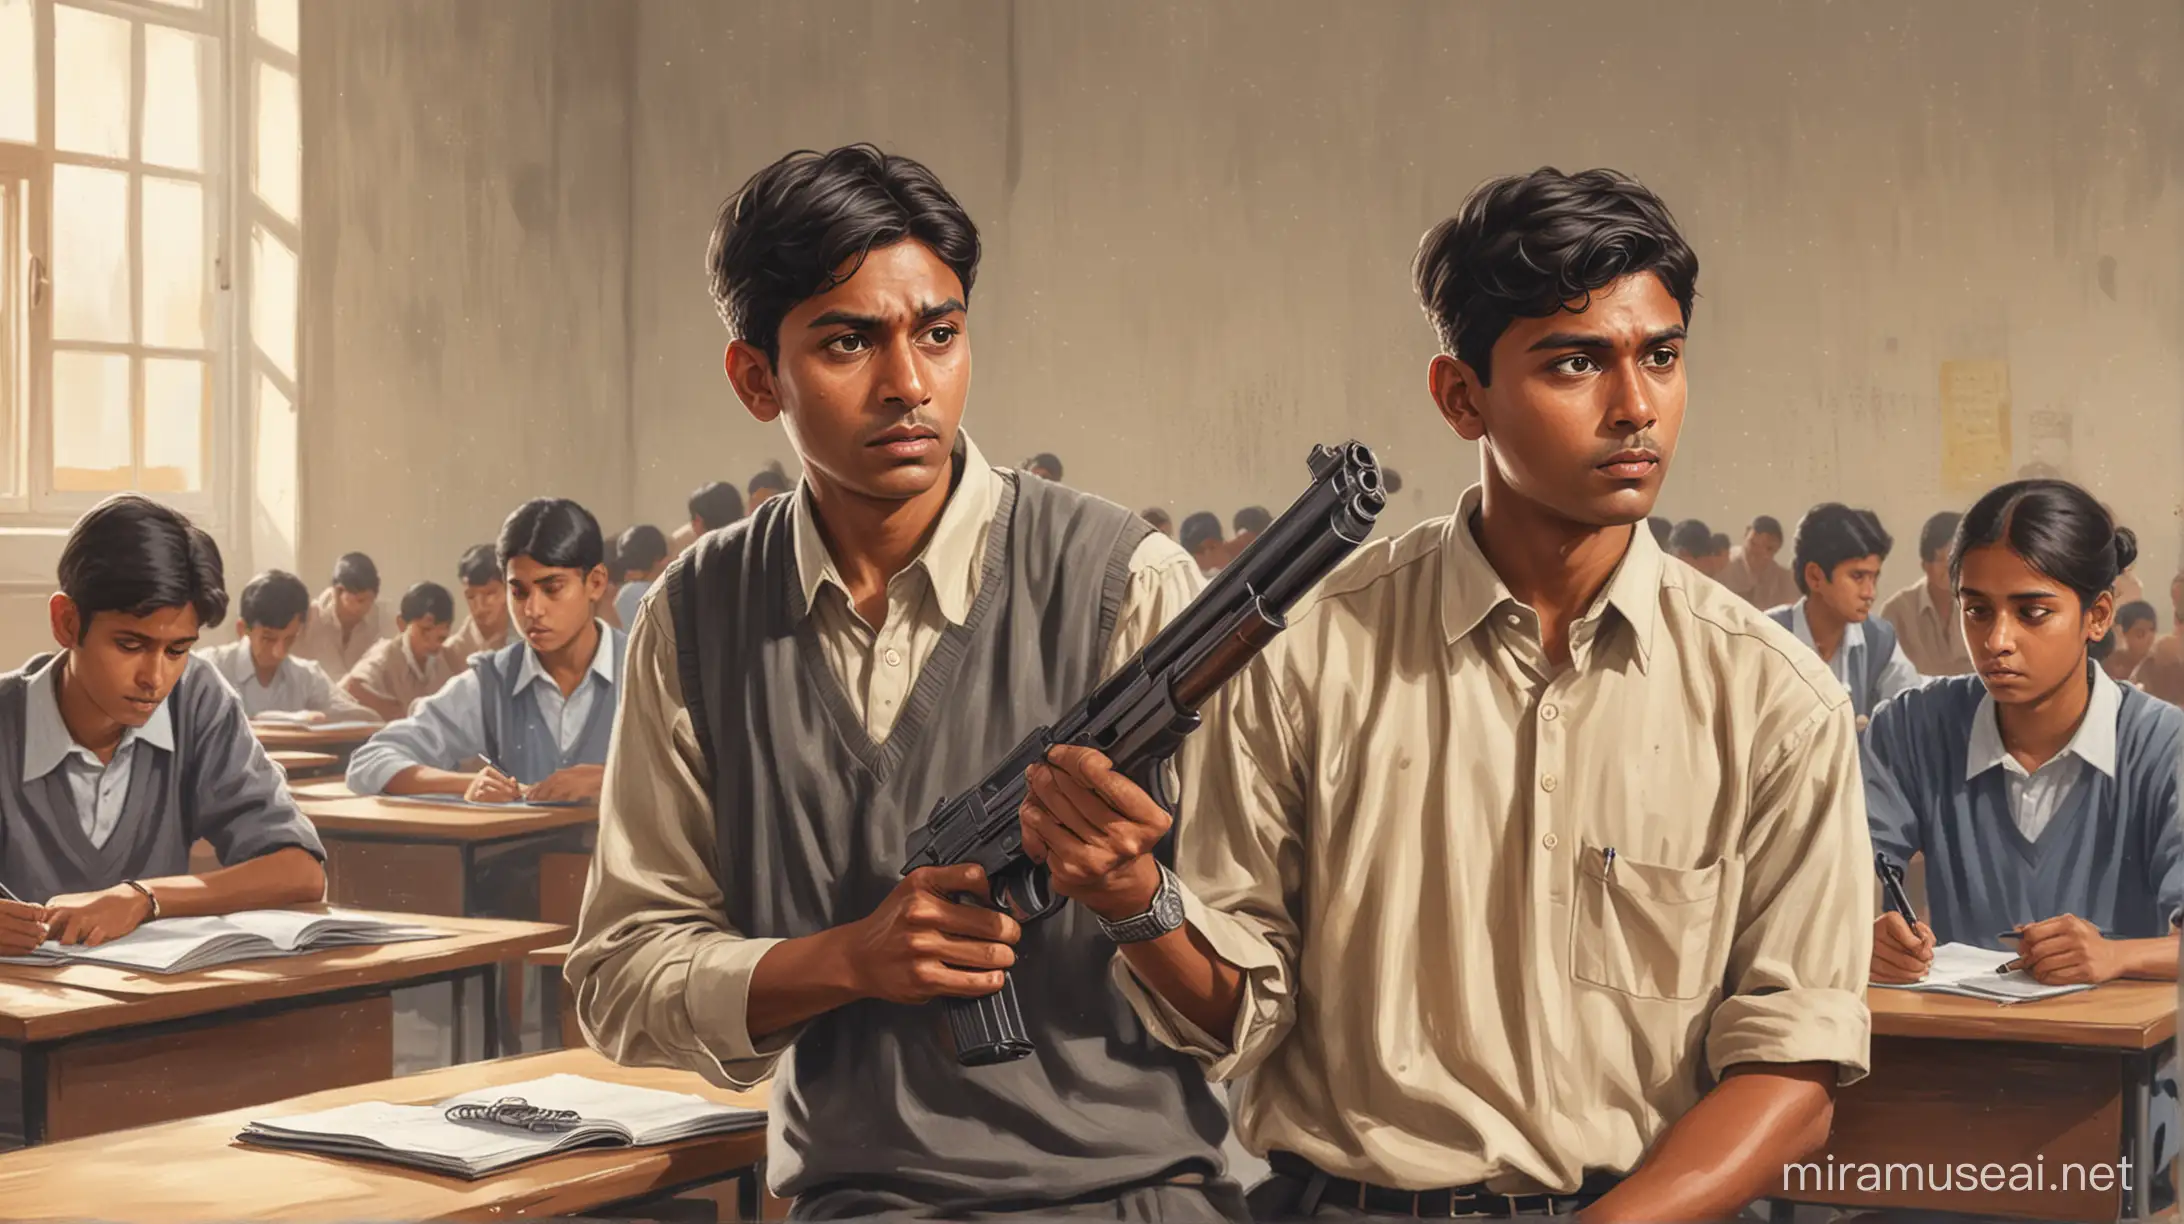 illustration of indian criminal in school with gun